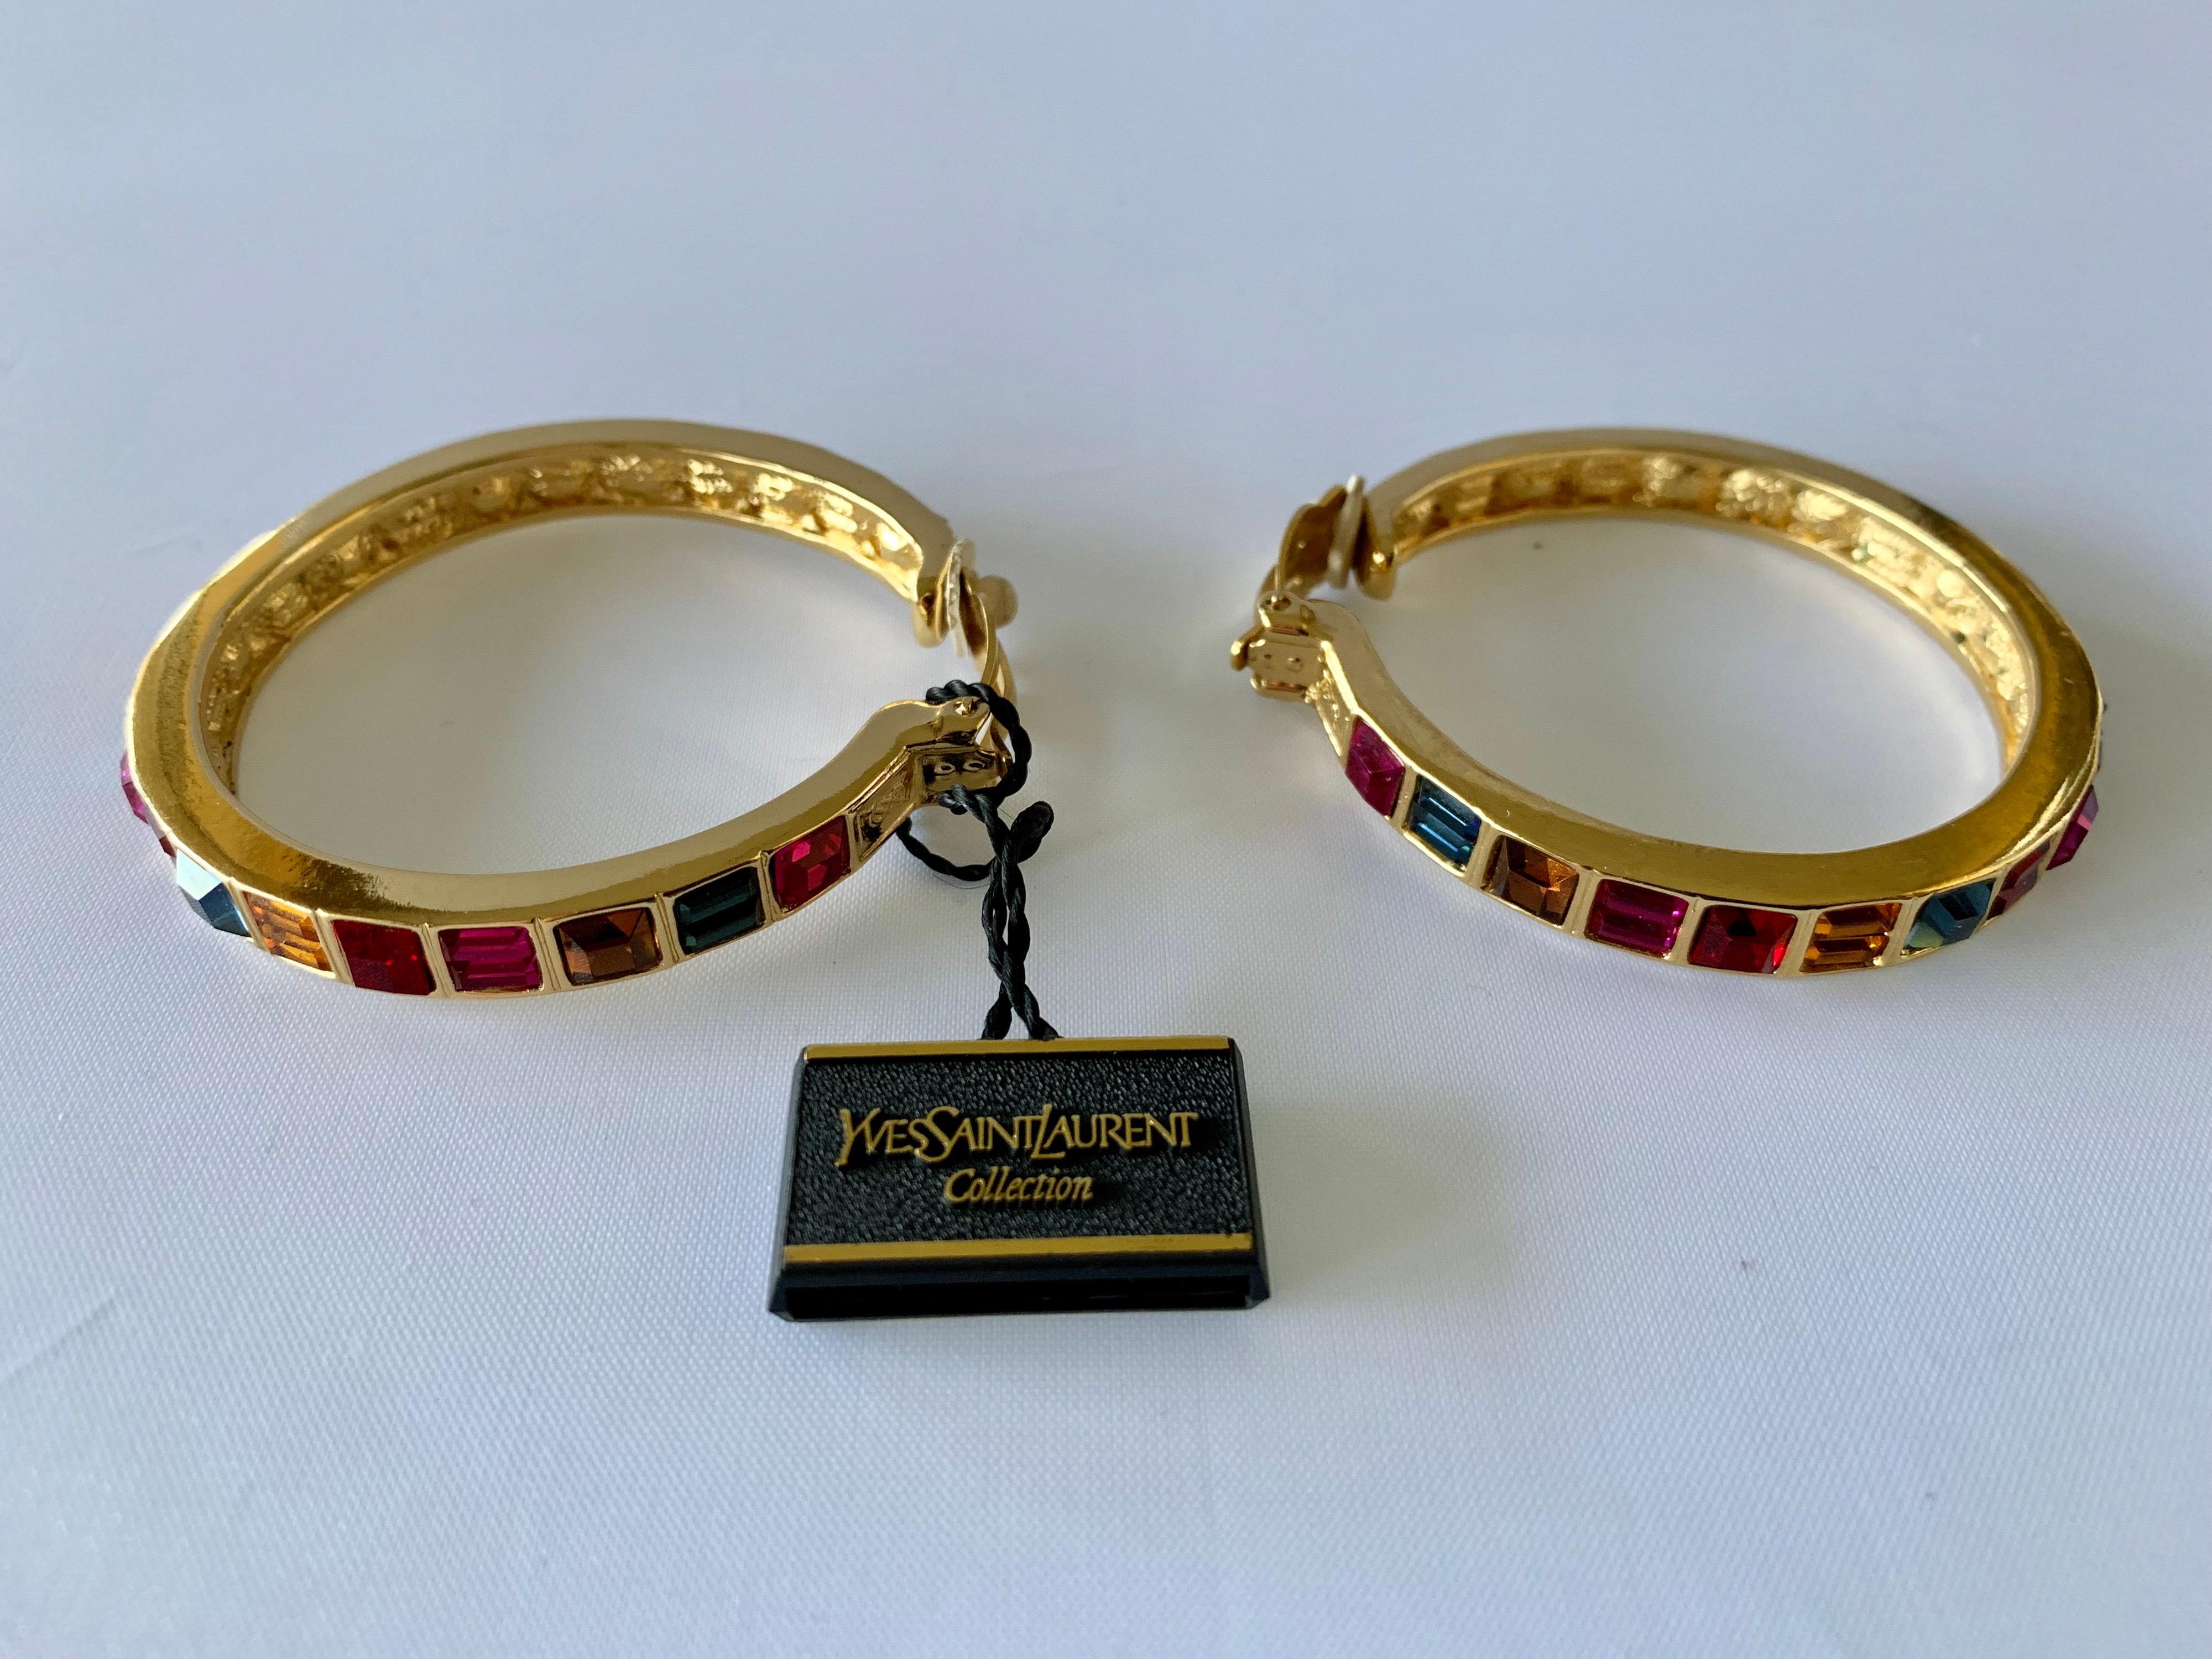 Vintage Yves Saint Laurent jeweled gold hoop statement clip-on earrings by Robert Goossens. The hoop earrings are comprised out of gold-tone metal in a sleek contemporary manner and are adorned by channel-set glass stones in red, fuchsia, blue, pink